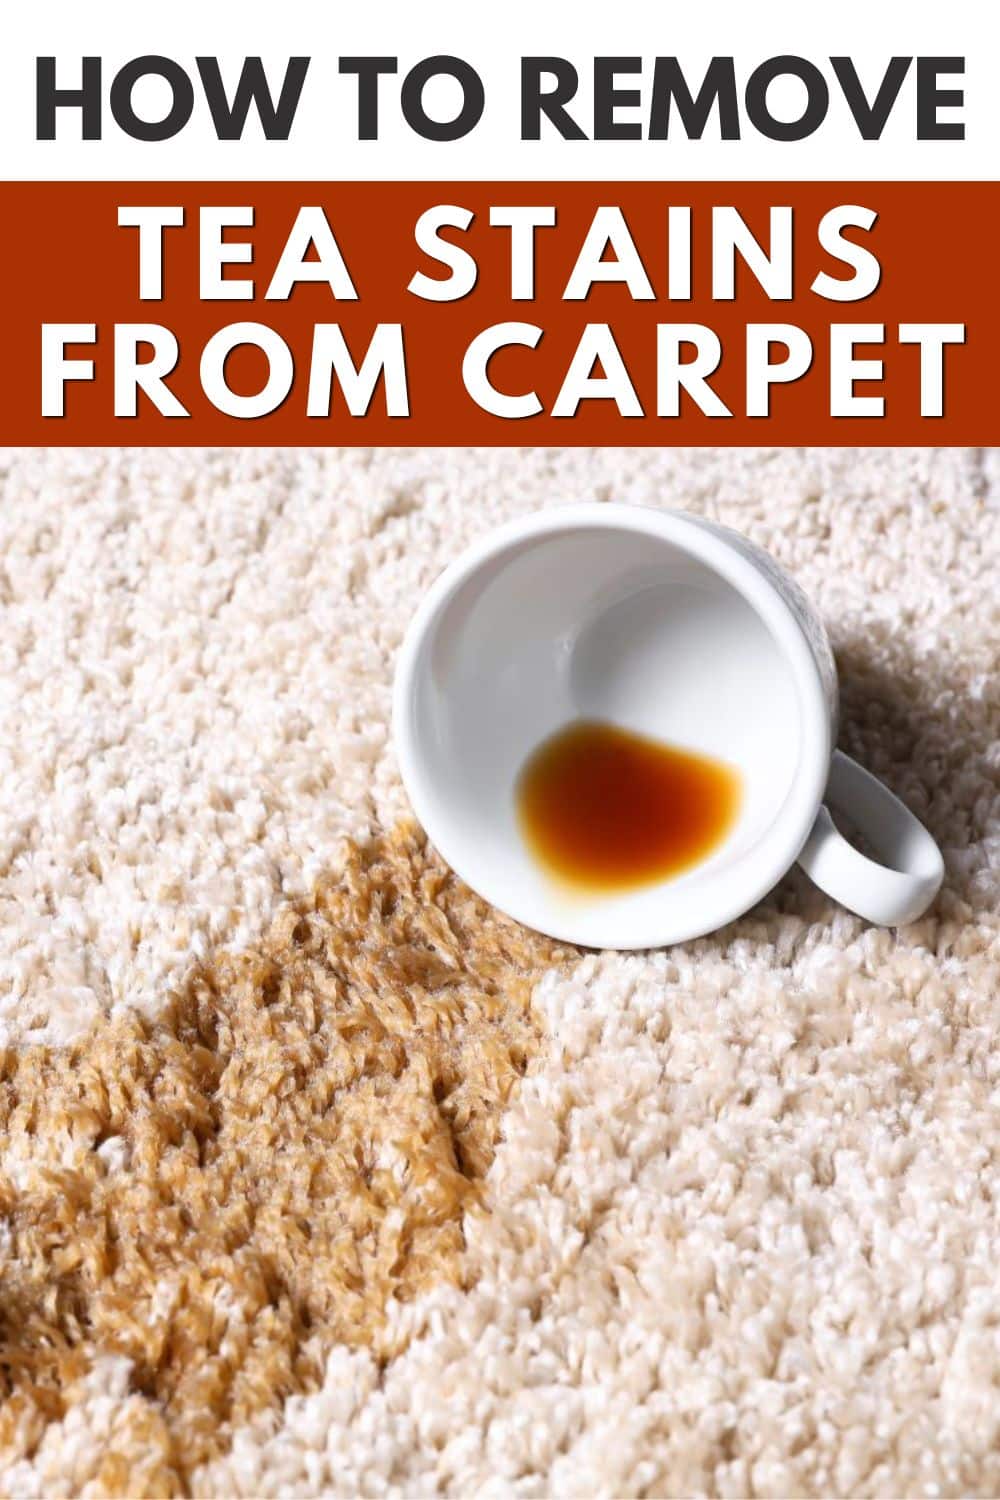 A cup of tea spilled on a carpet with text title "How to Remove Tea Stains From Carpet".